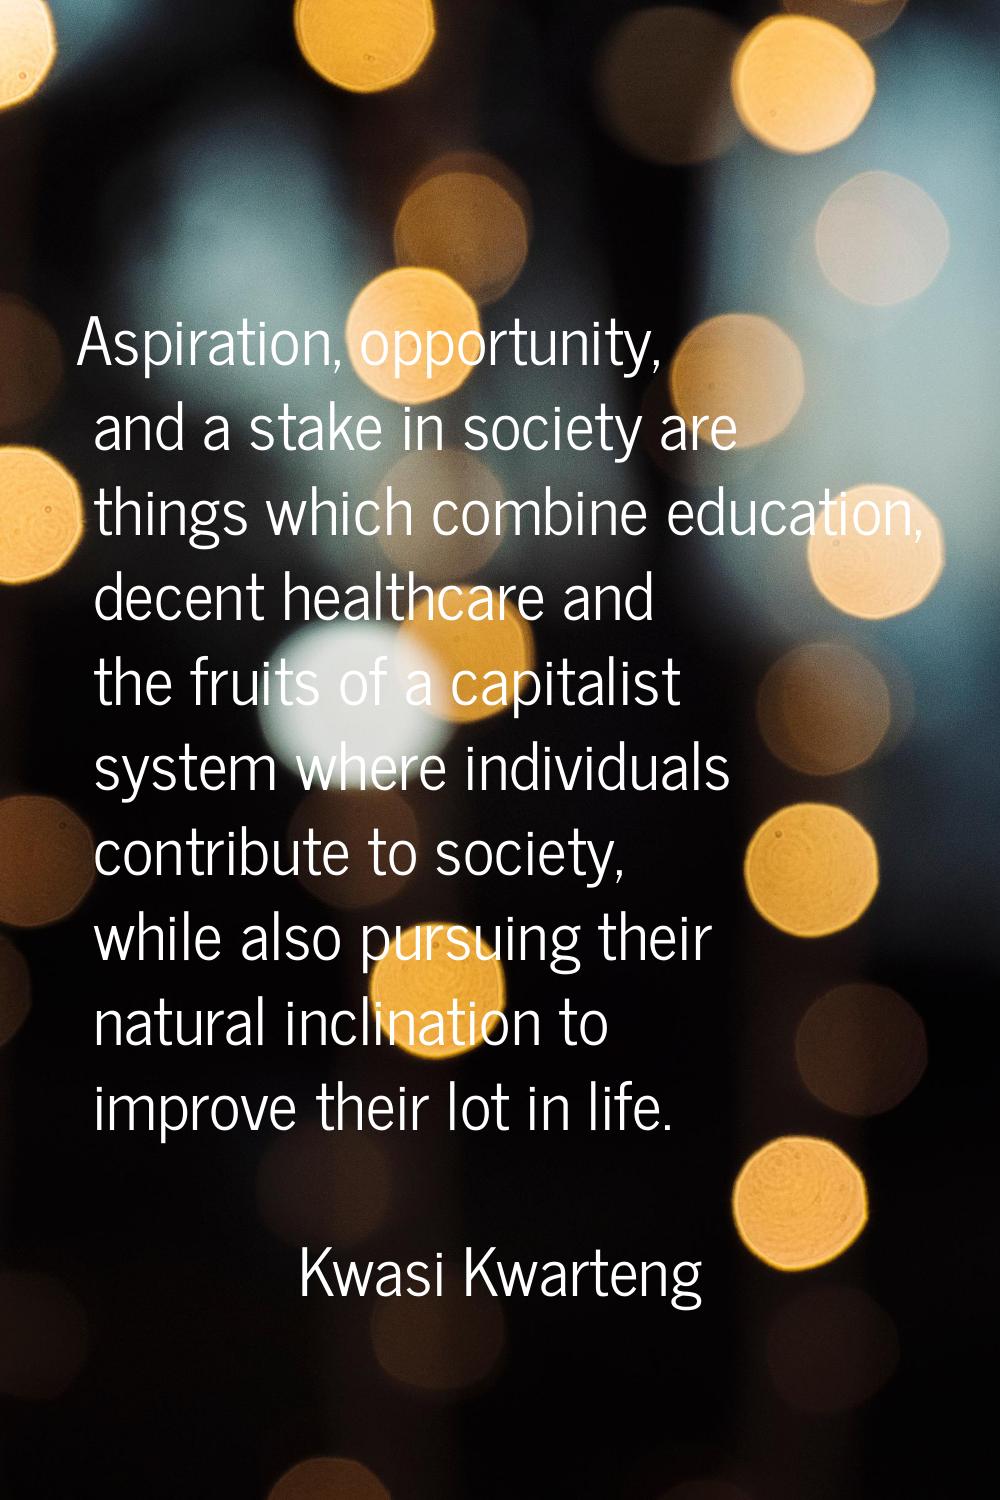 Aspiration, opportunity, and a stake in society are things which combine education, decent healthca